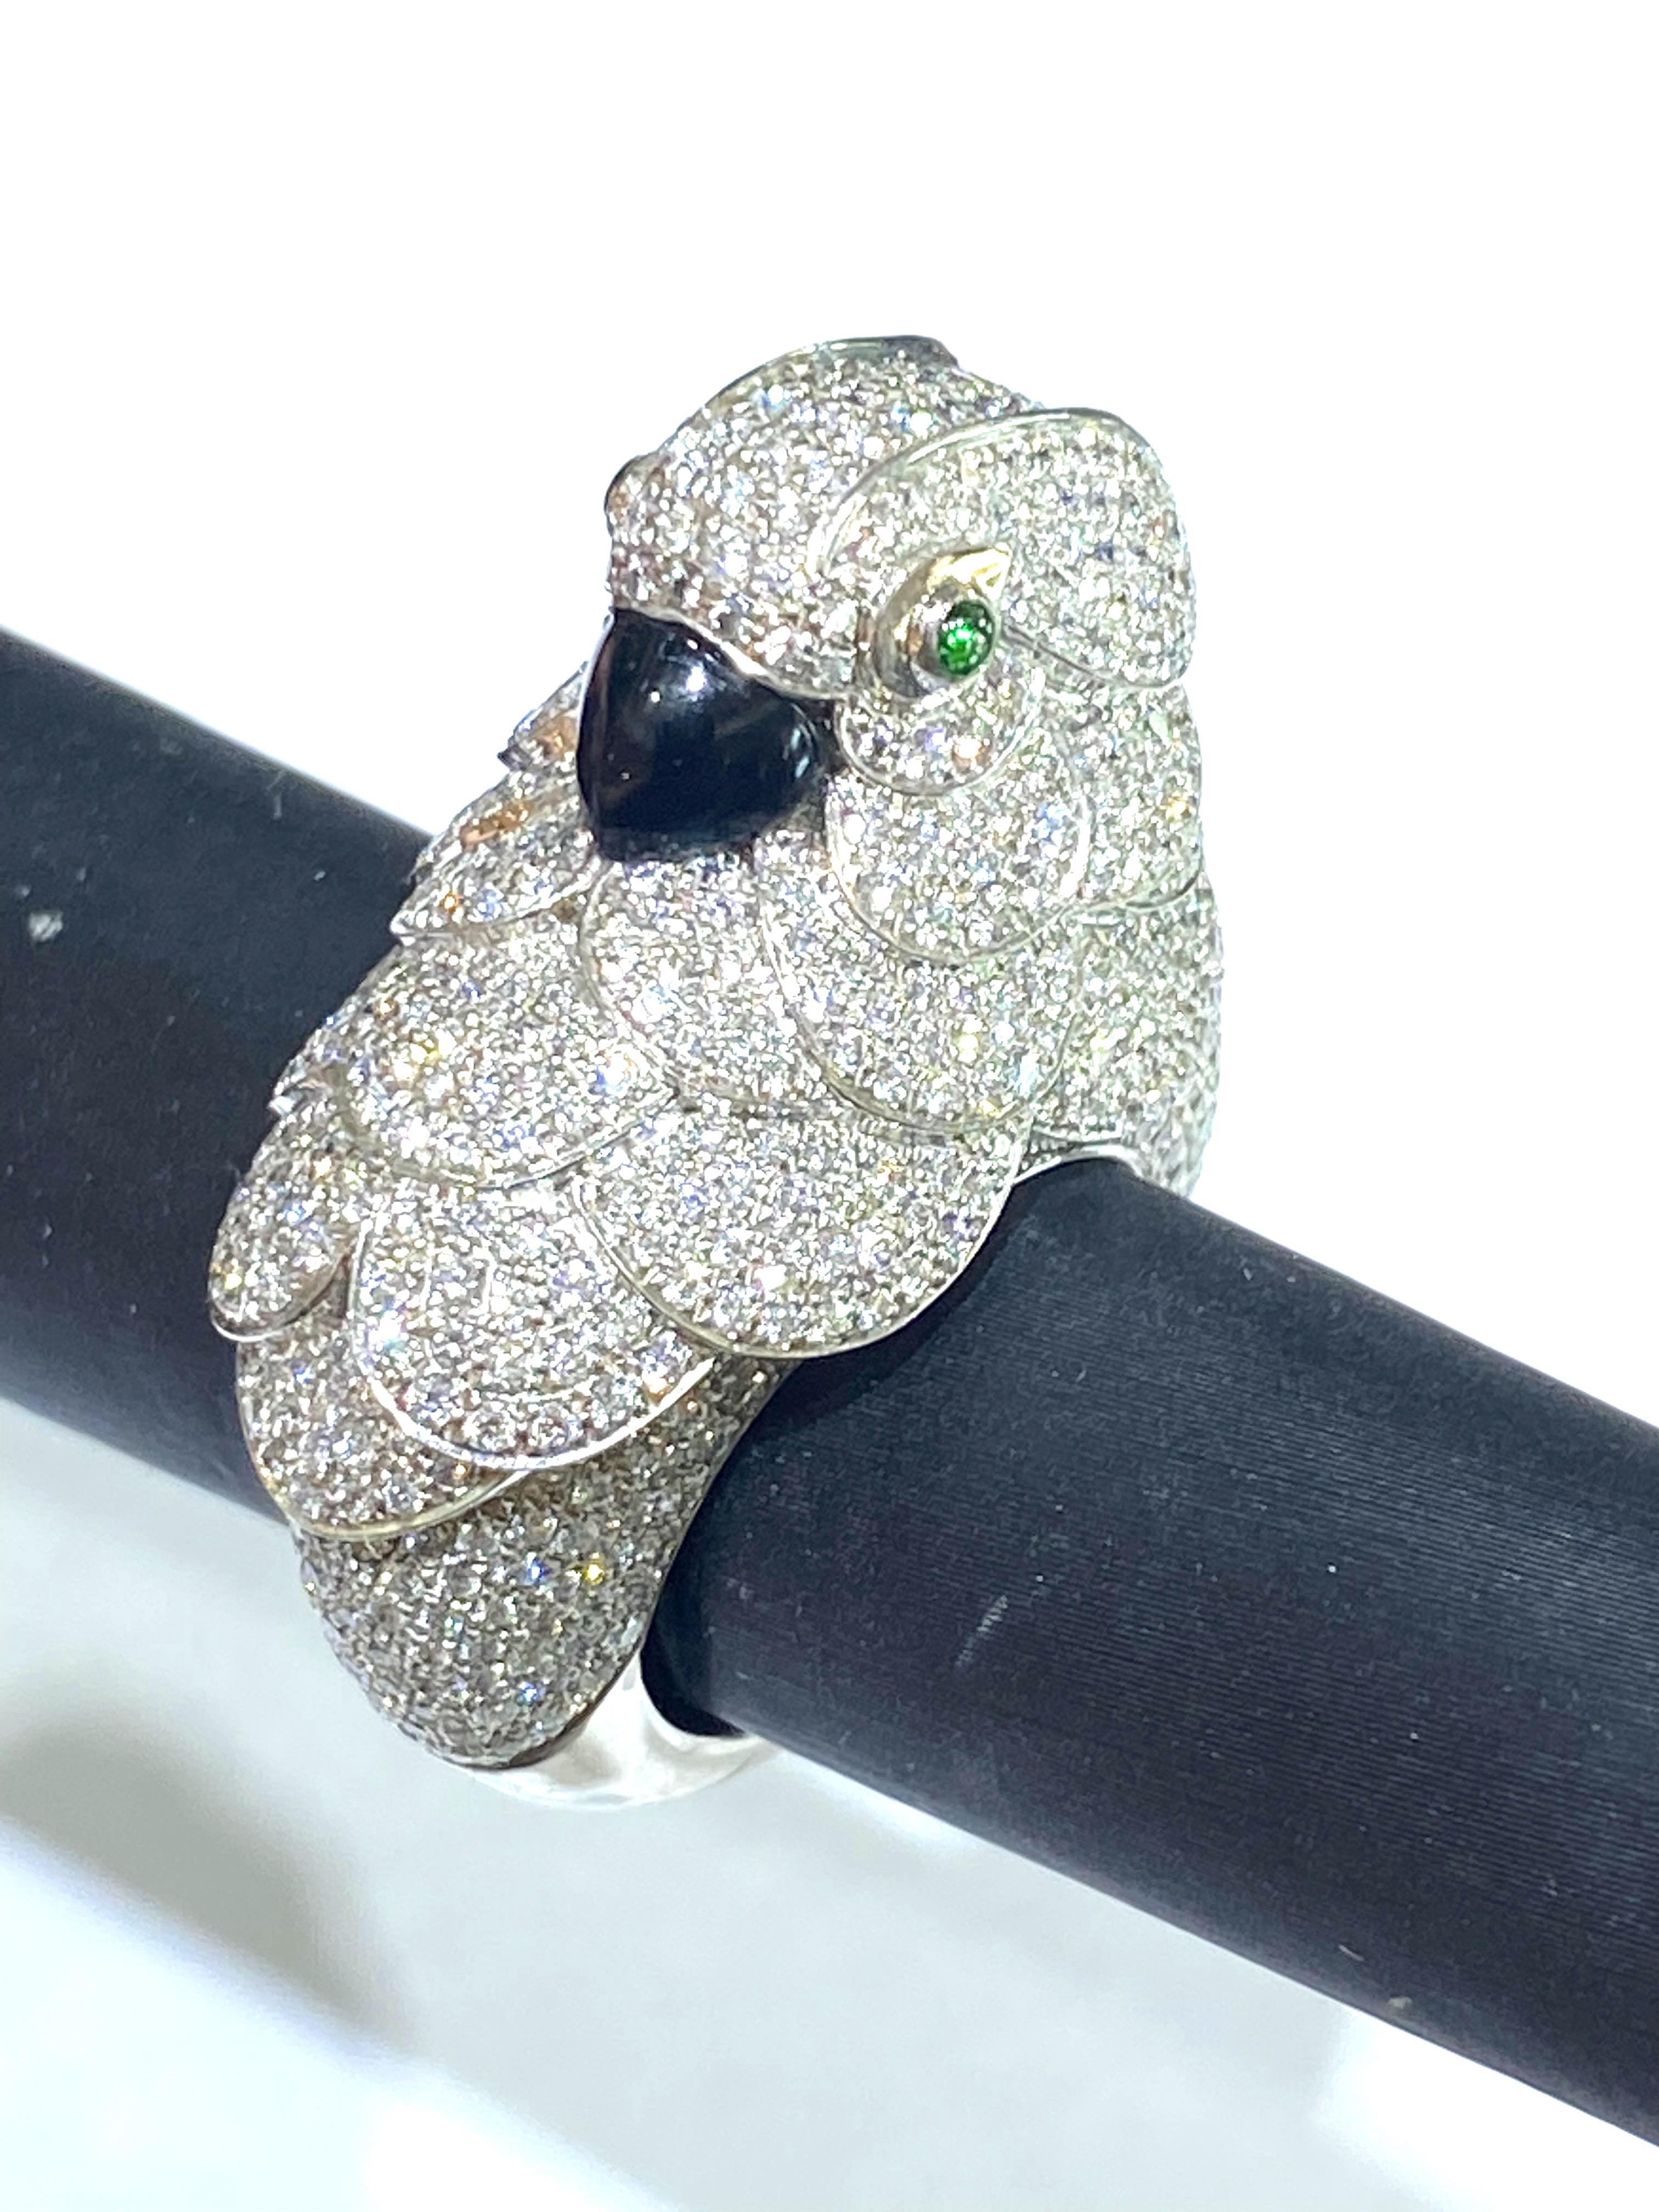 3 Carat Diamond Parrot Statement Ring with Emeralds and Black Onyx 2